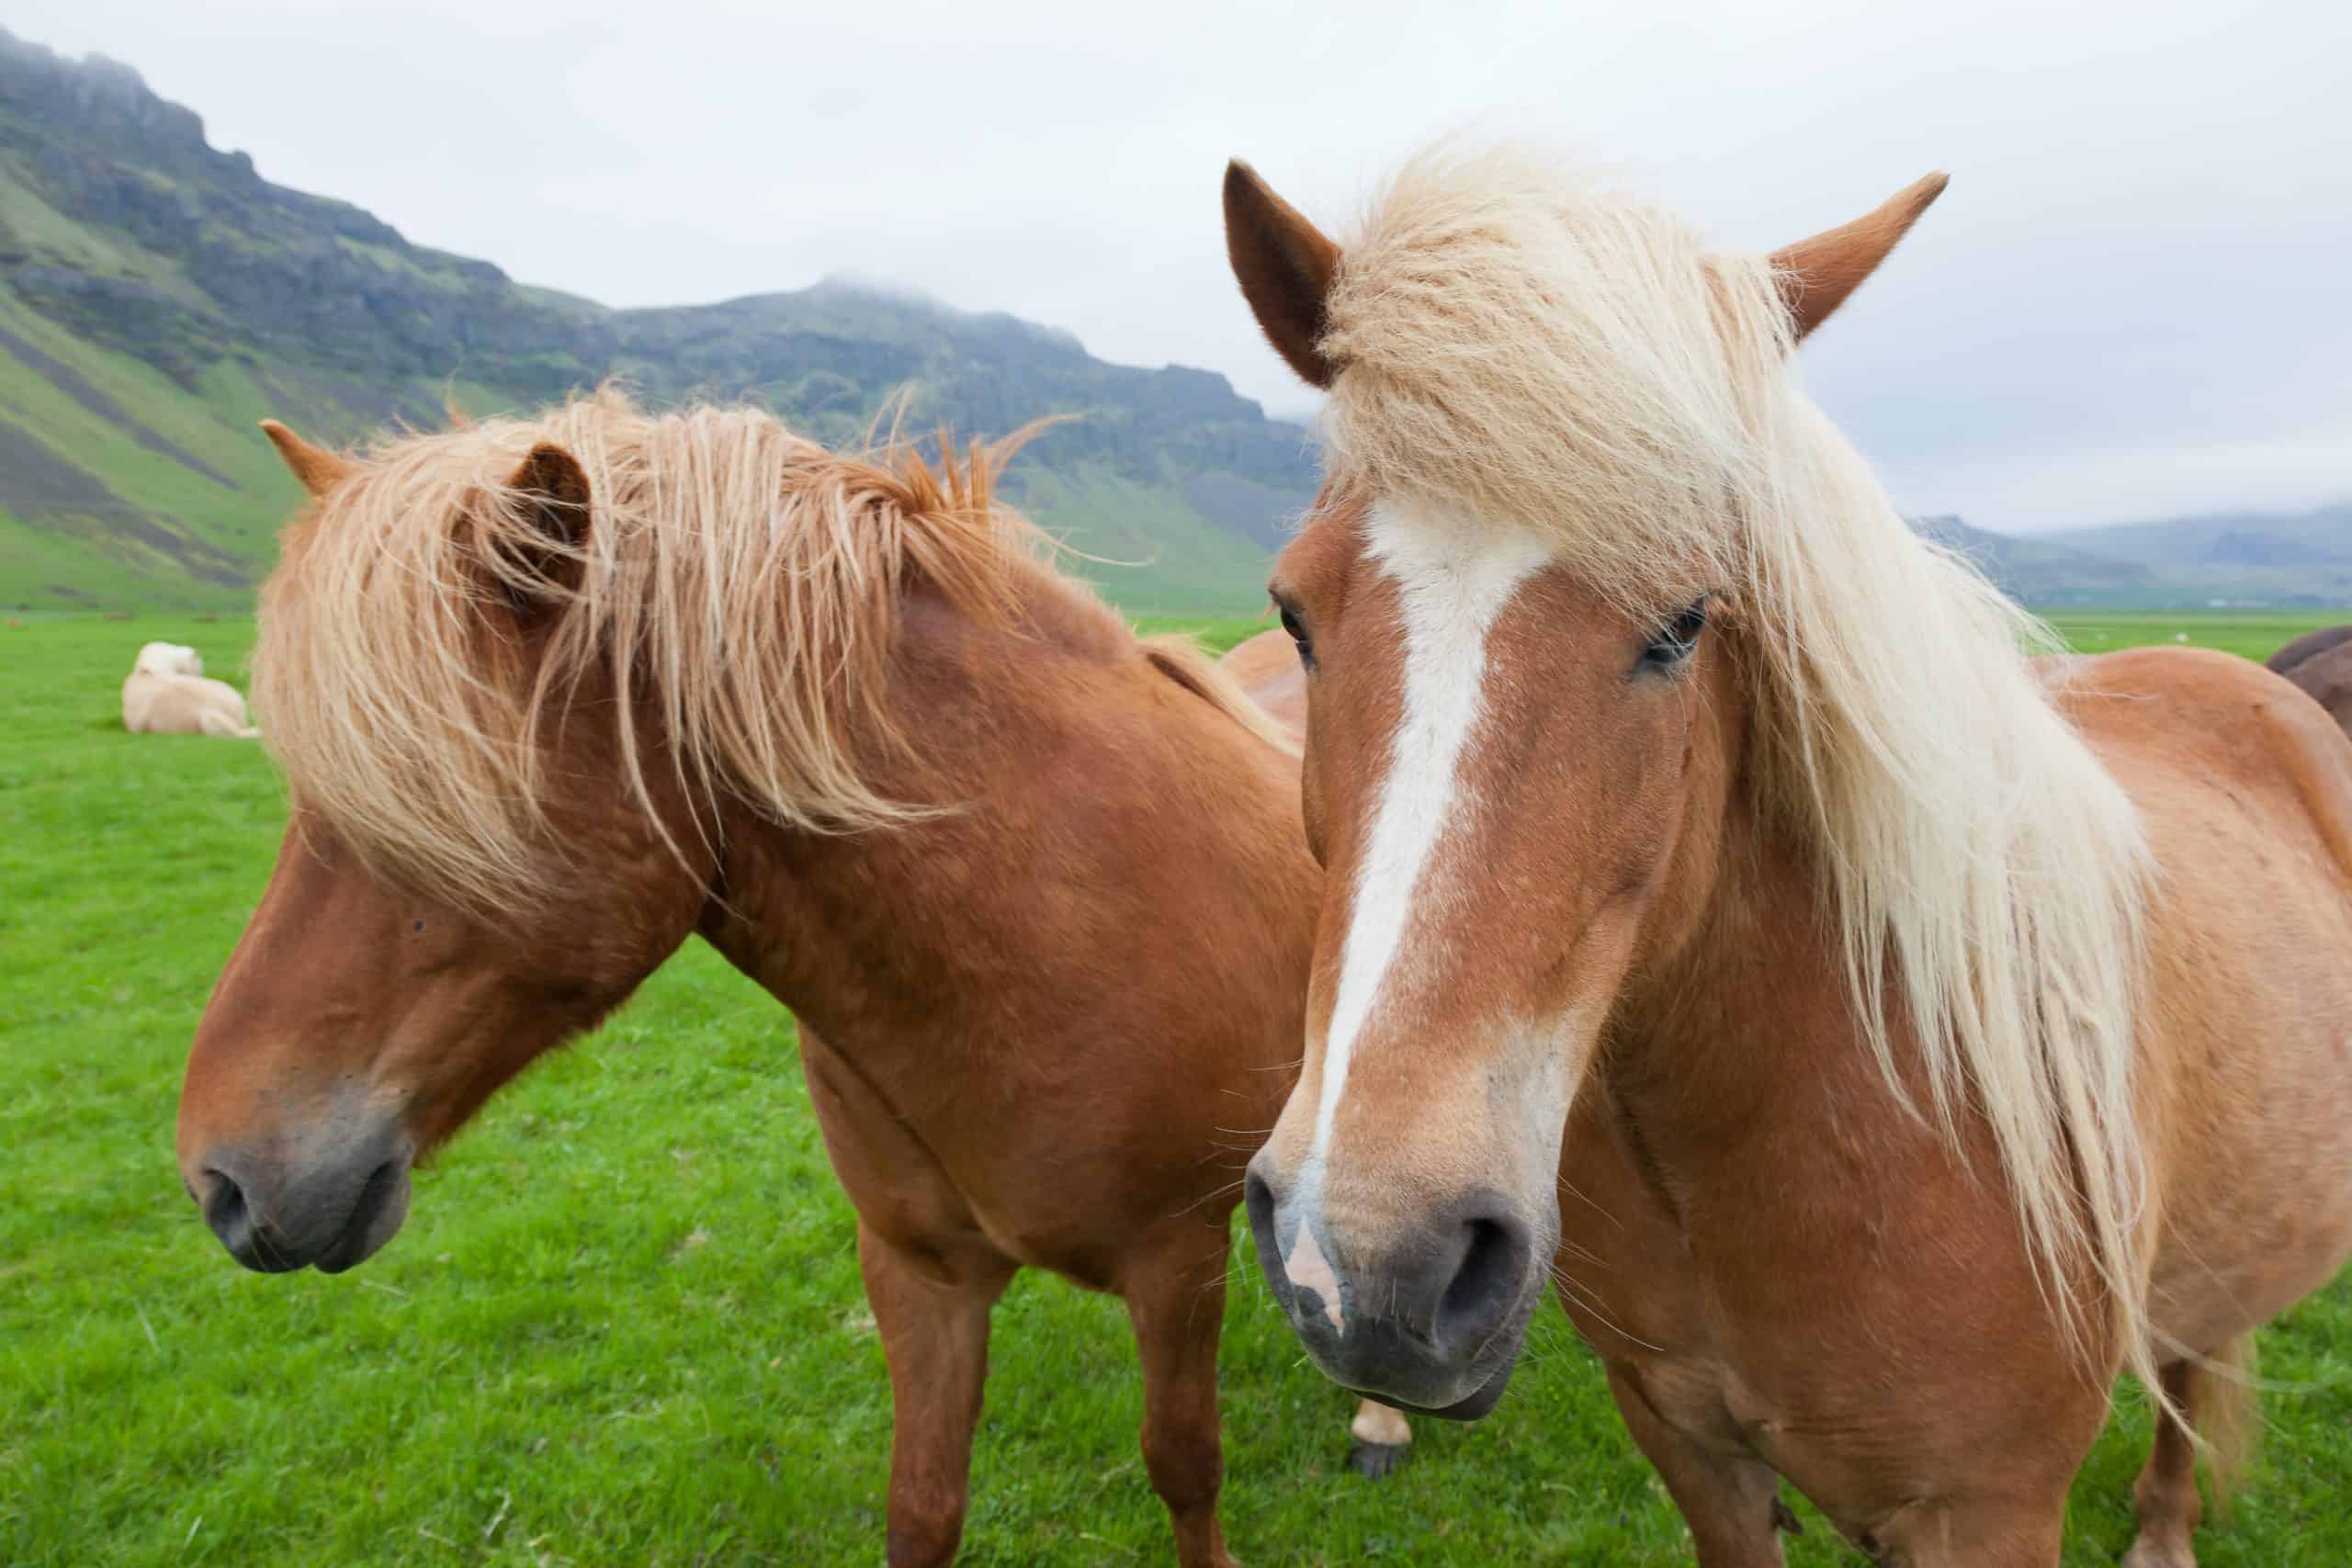 Two nice horses with chestnut hair coat walking in a summer 